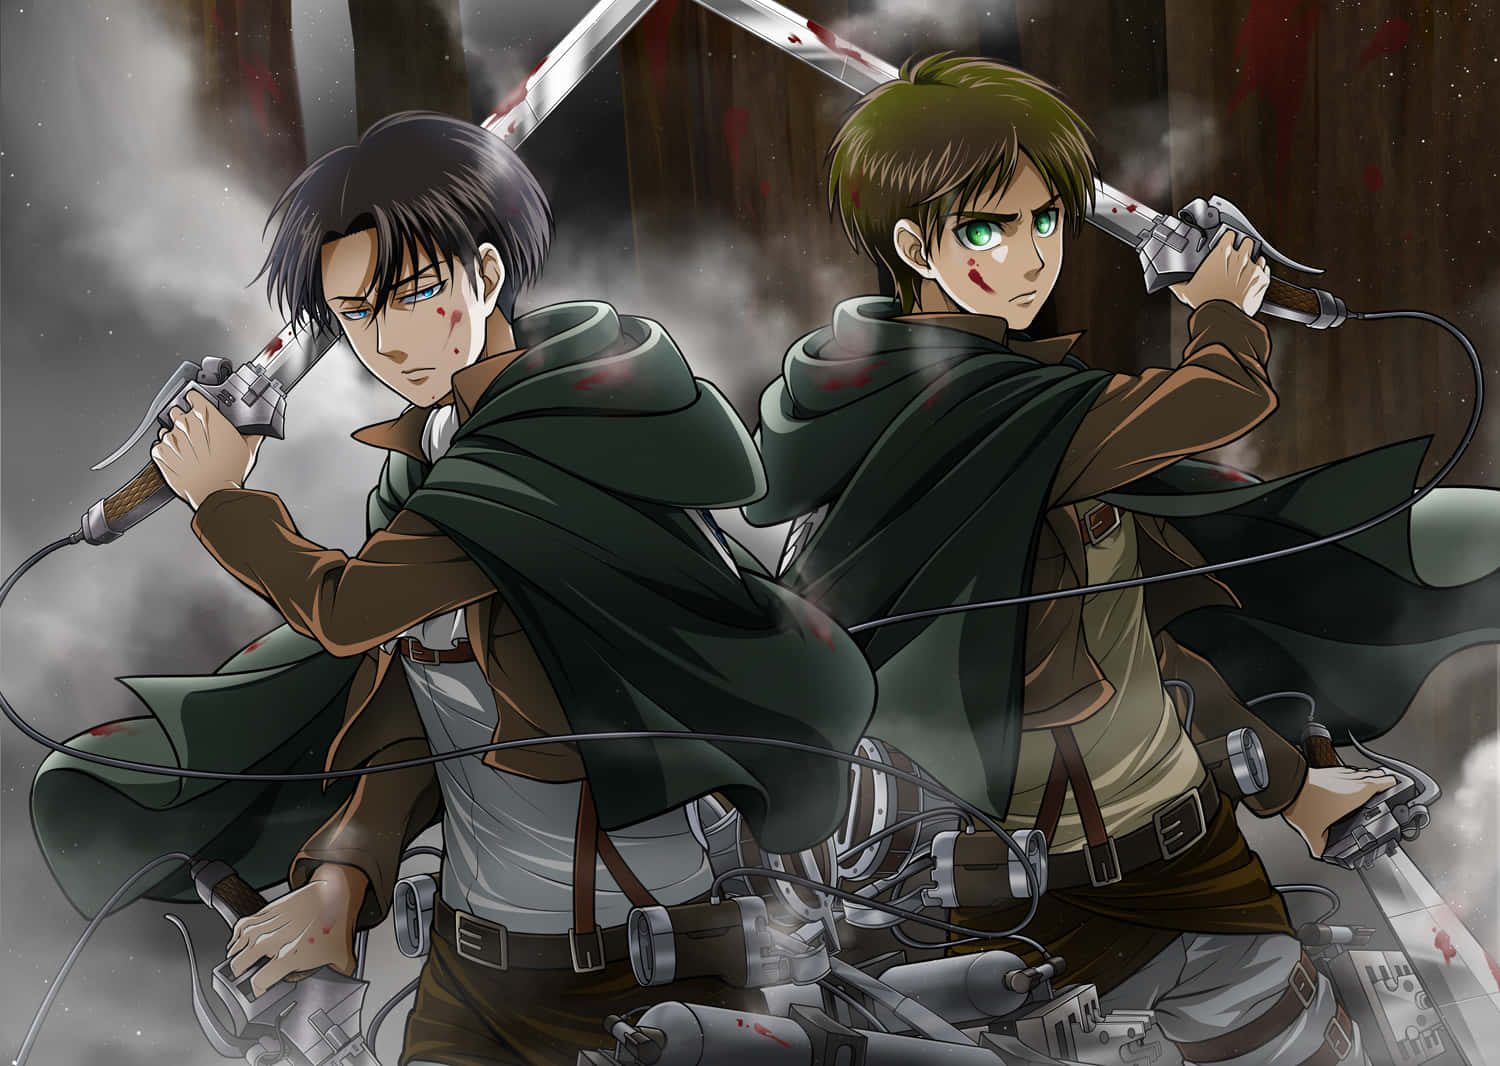 "The world of Eren Yeager and his journey to protect humanity from the 'Titans'".